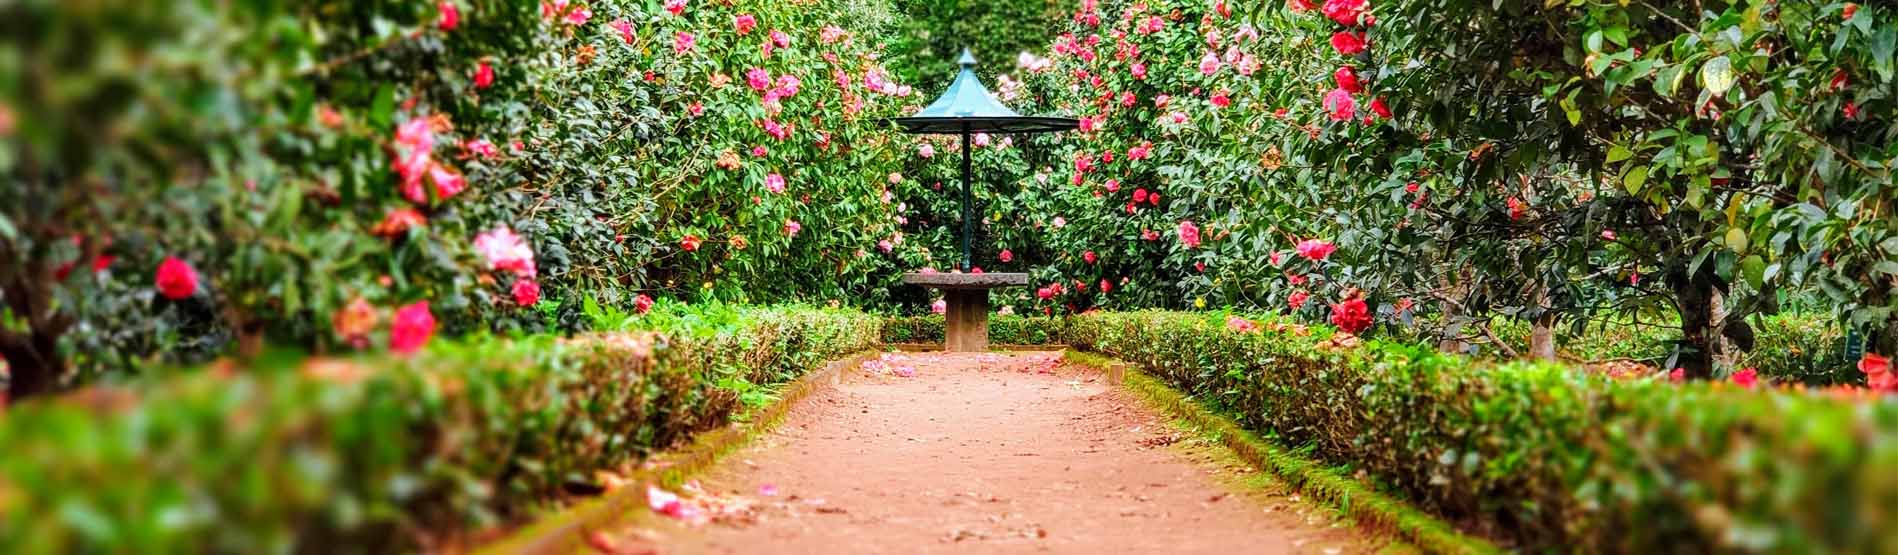 Image of a garden with pink flower trees 